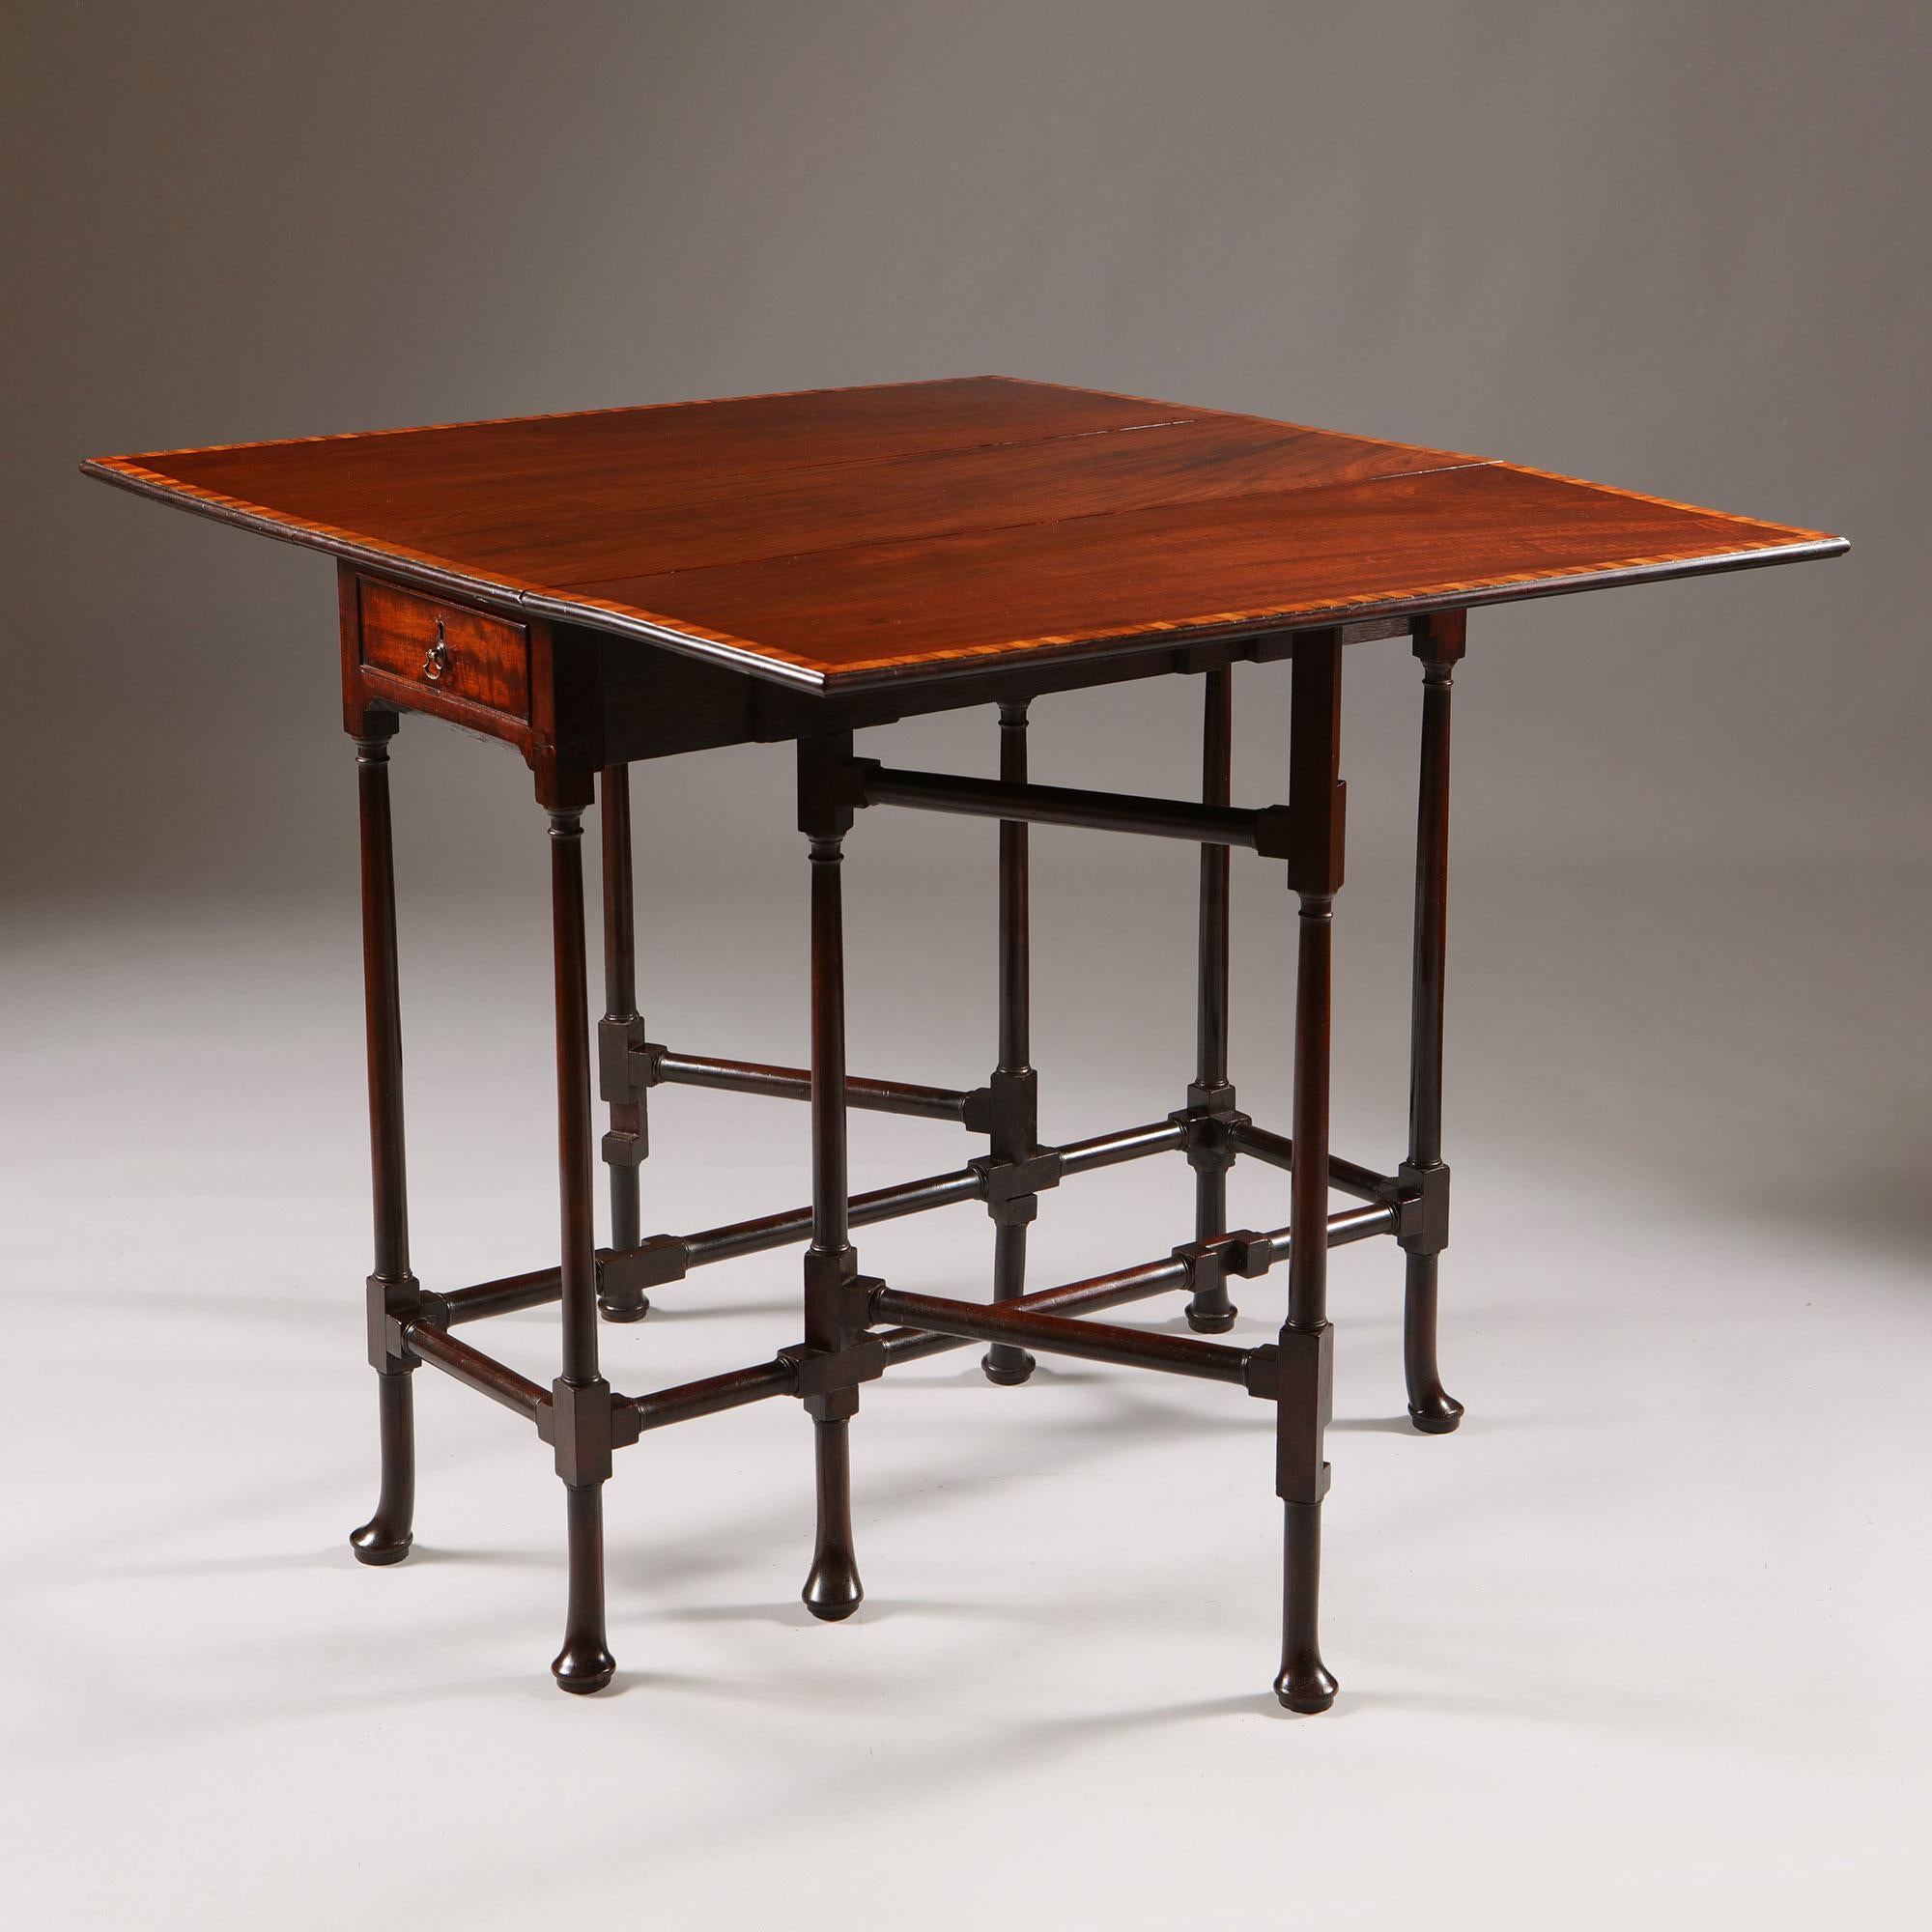 English A George III mahogany spider-leg table attributed to Thomas Chippendale 1768 For Sale